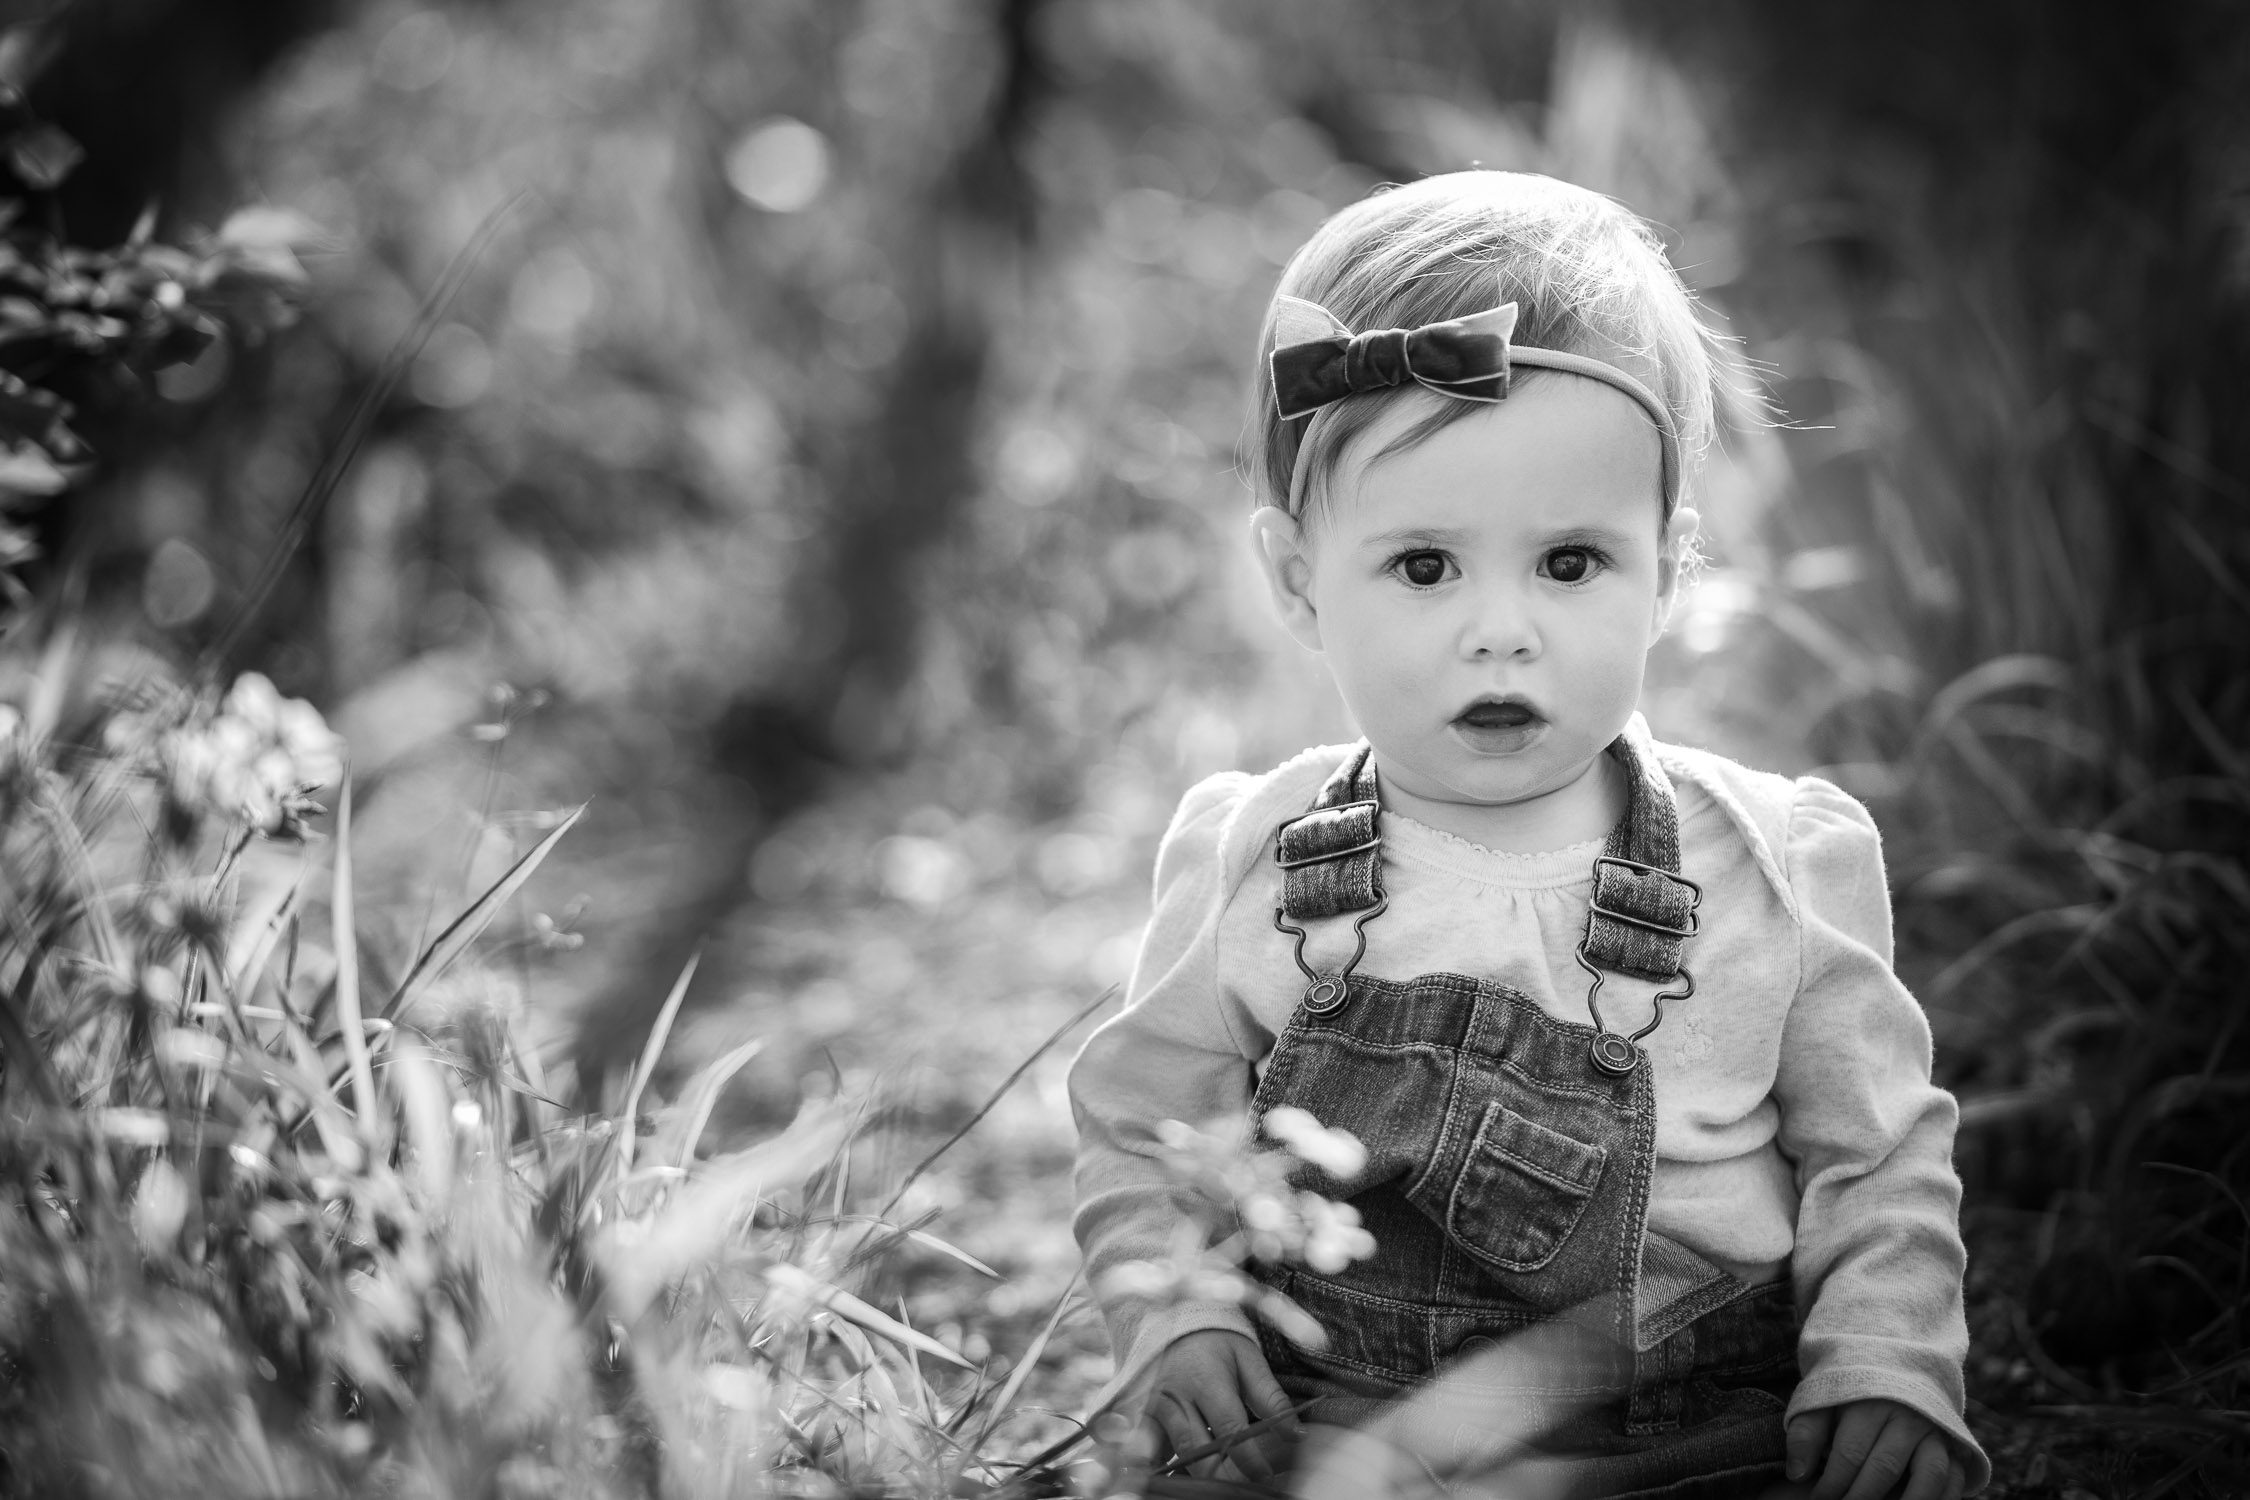 Daughter with bow in her hair sitting down in the grass for family photographs -Black and white photo- Kasmann Family Photos by Schaefer Photography in Capen Park, Columbia, Missouri.